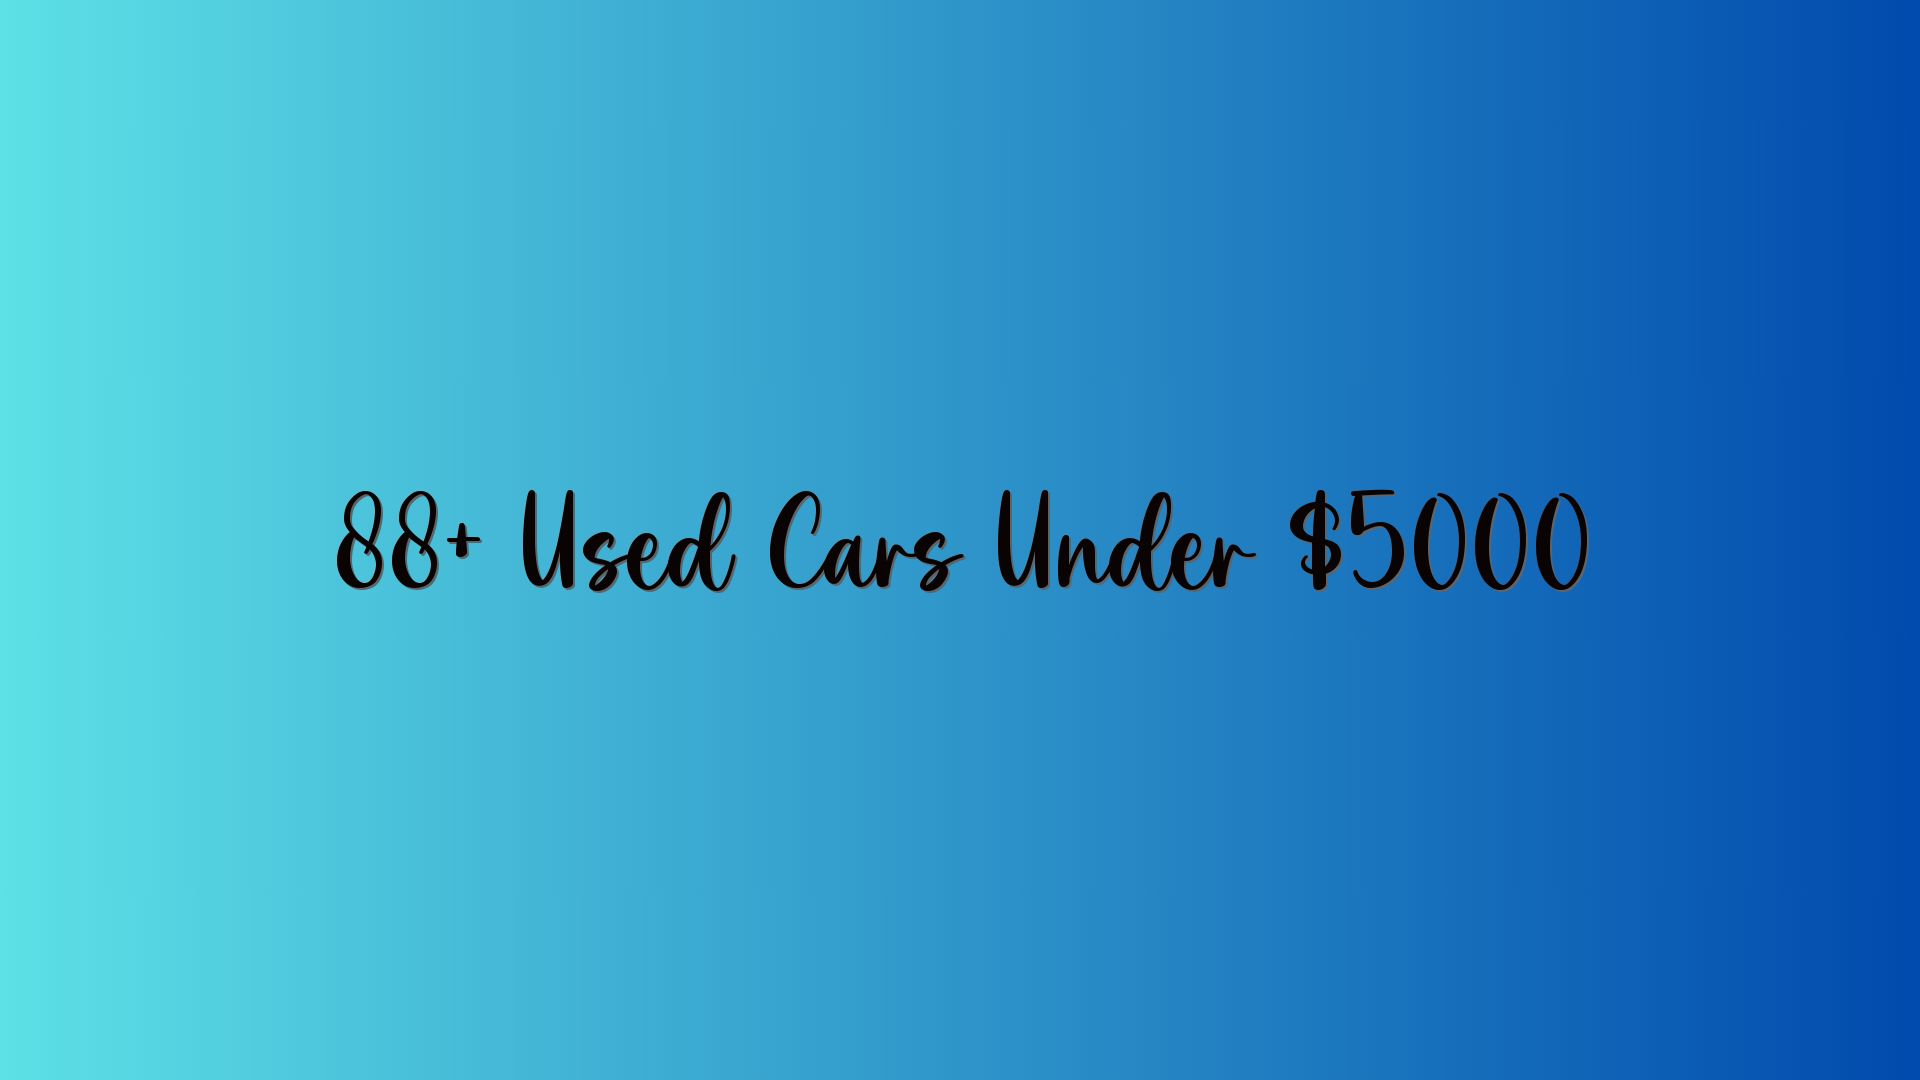 88+ Used Cars Under $5000